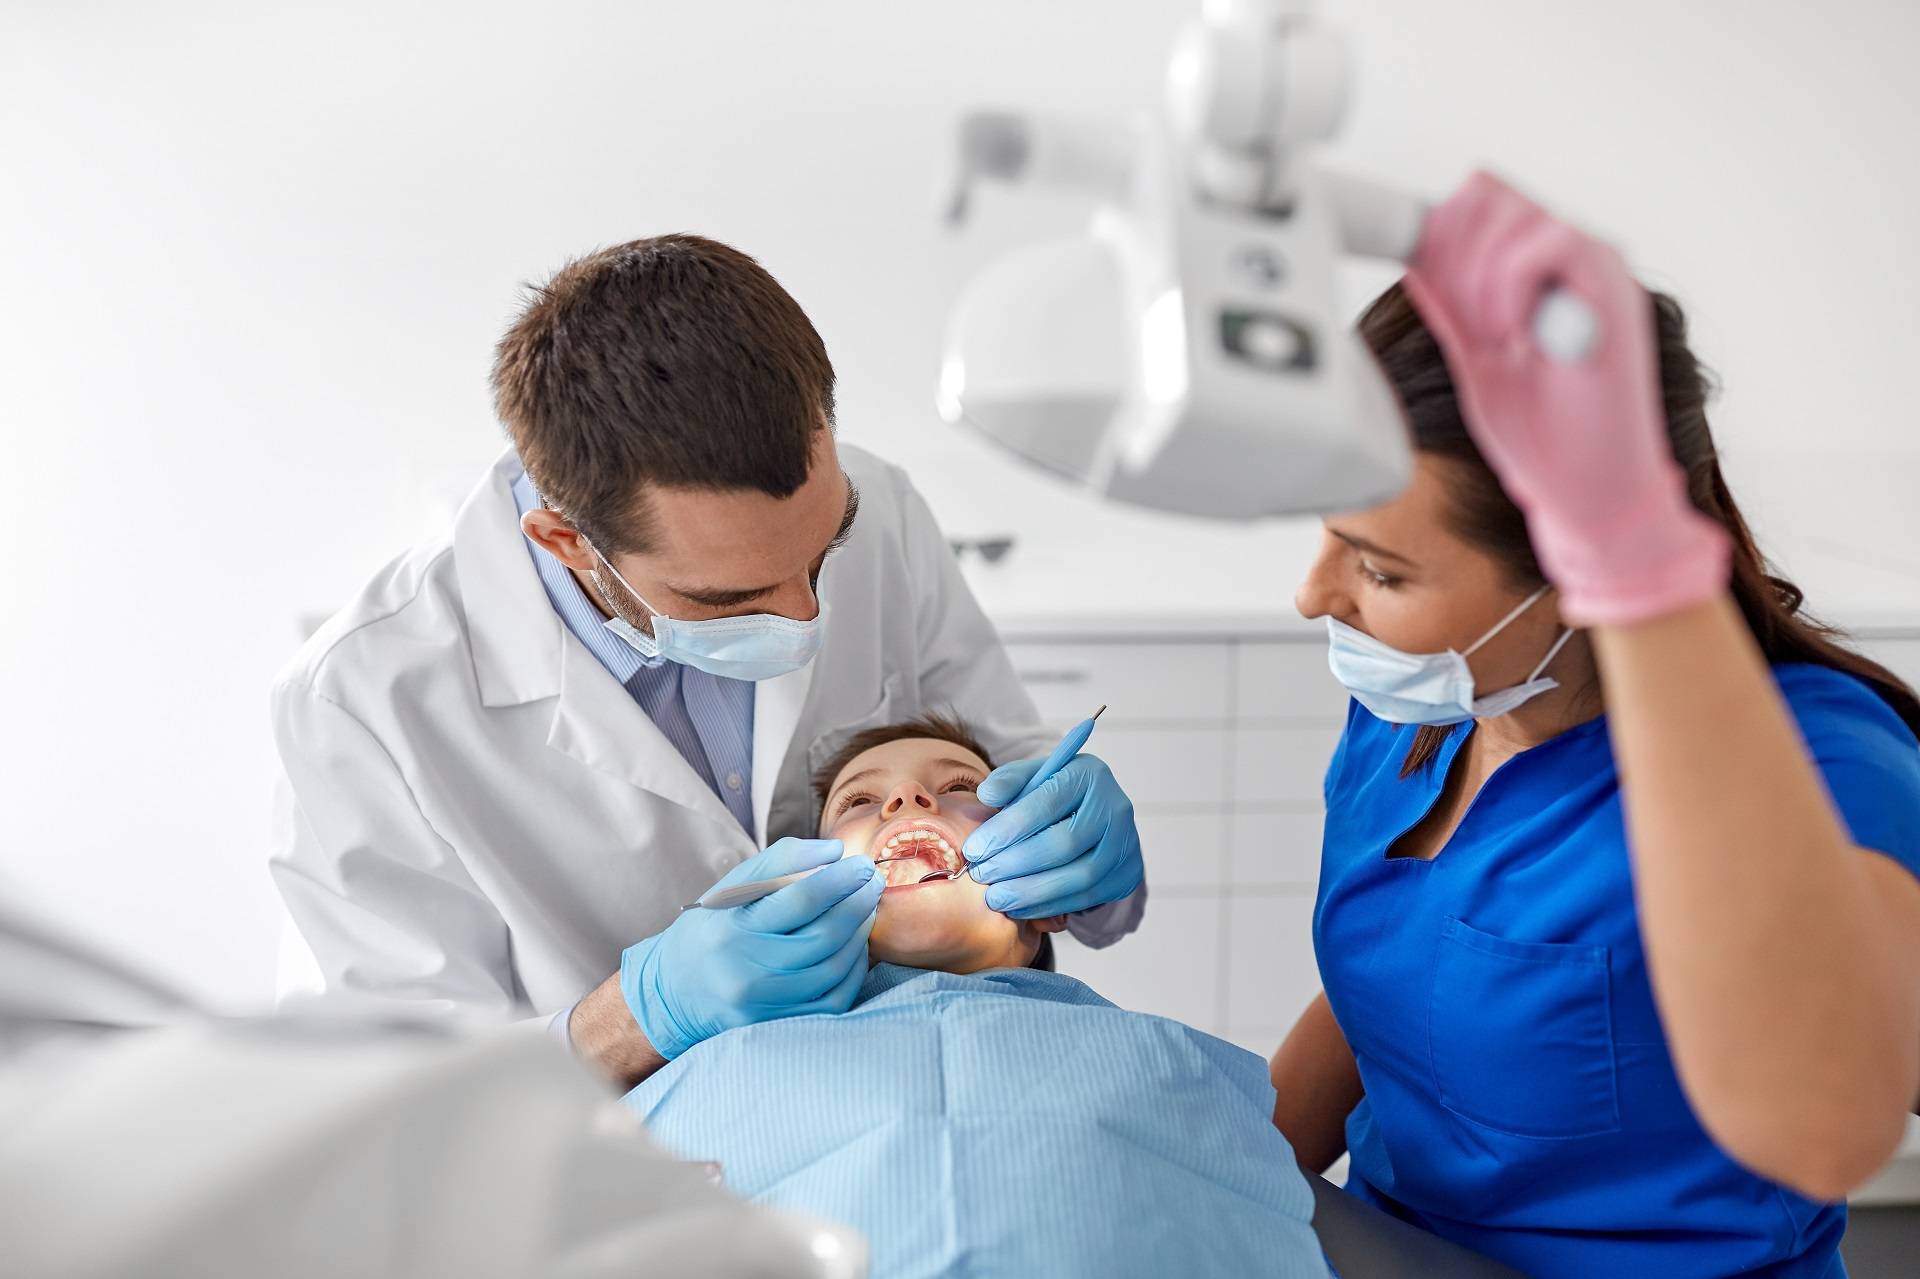 Dental Assistant Jobs in the USA